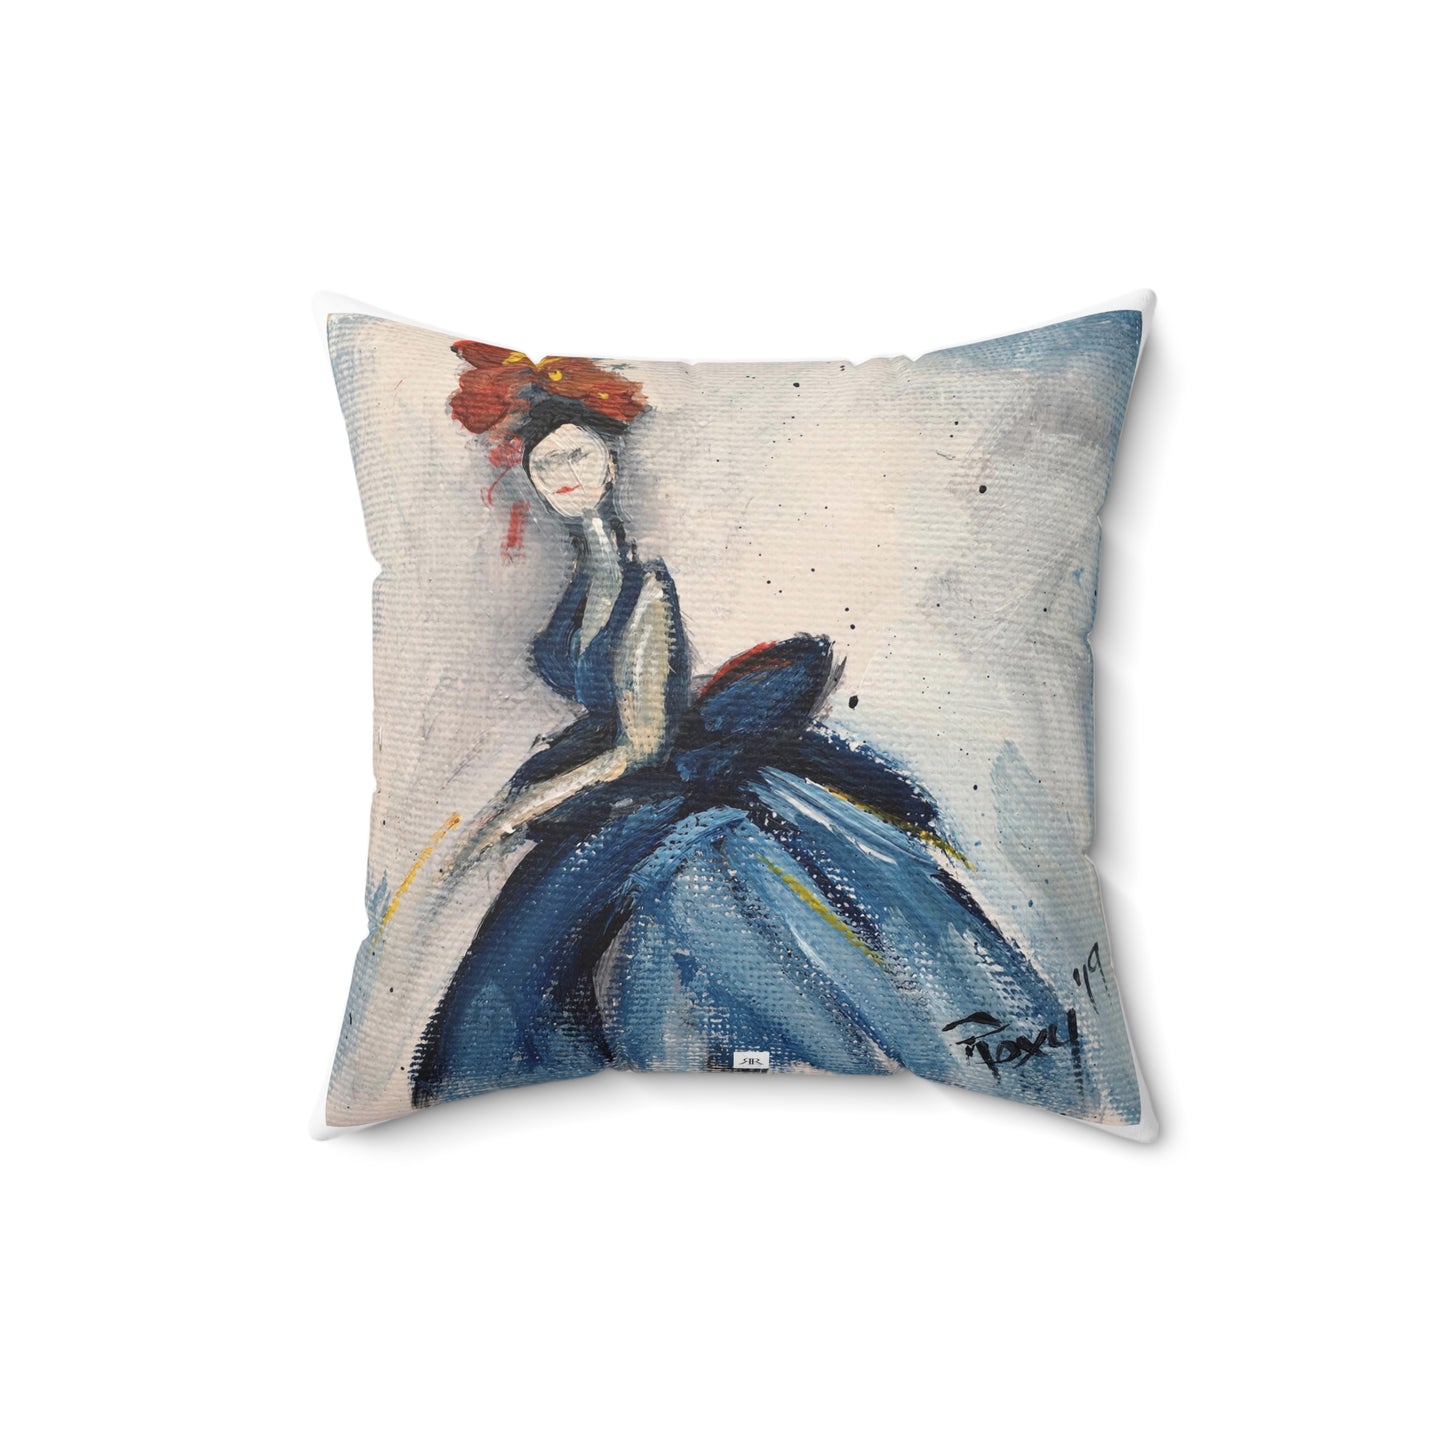 To the Ball Indoor Spun Polyester Square Pillow